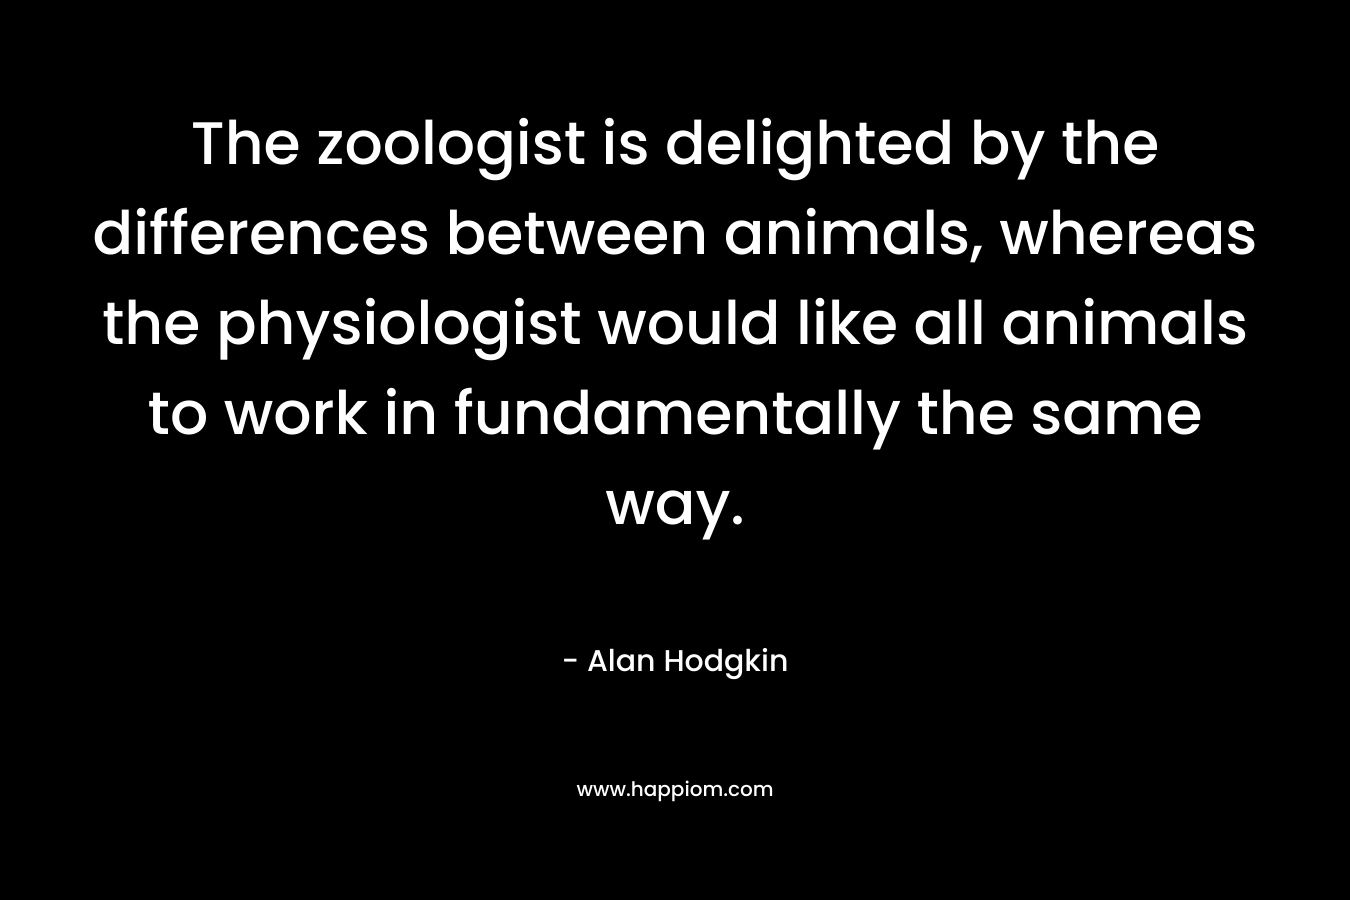 The zoologist is delighted by the differences between animals, whereas the physiologist would like all animals to work in fundamentally the same way.